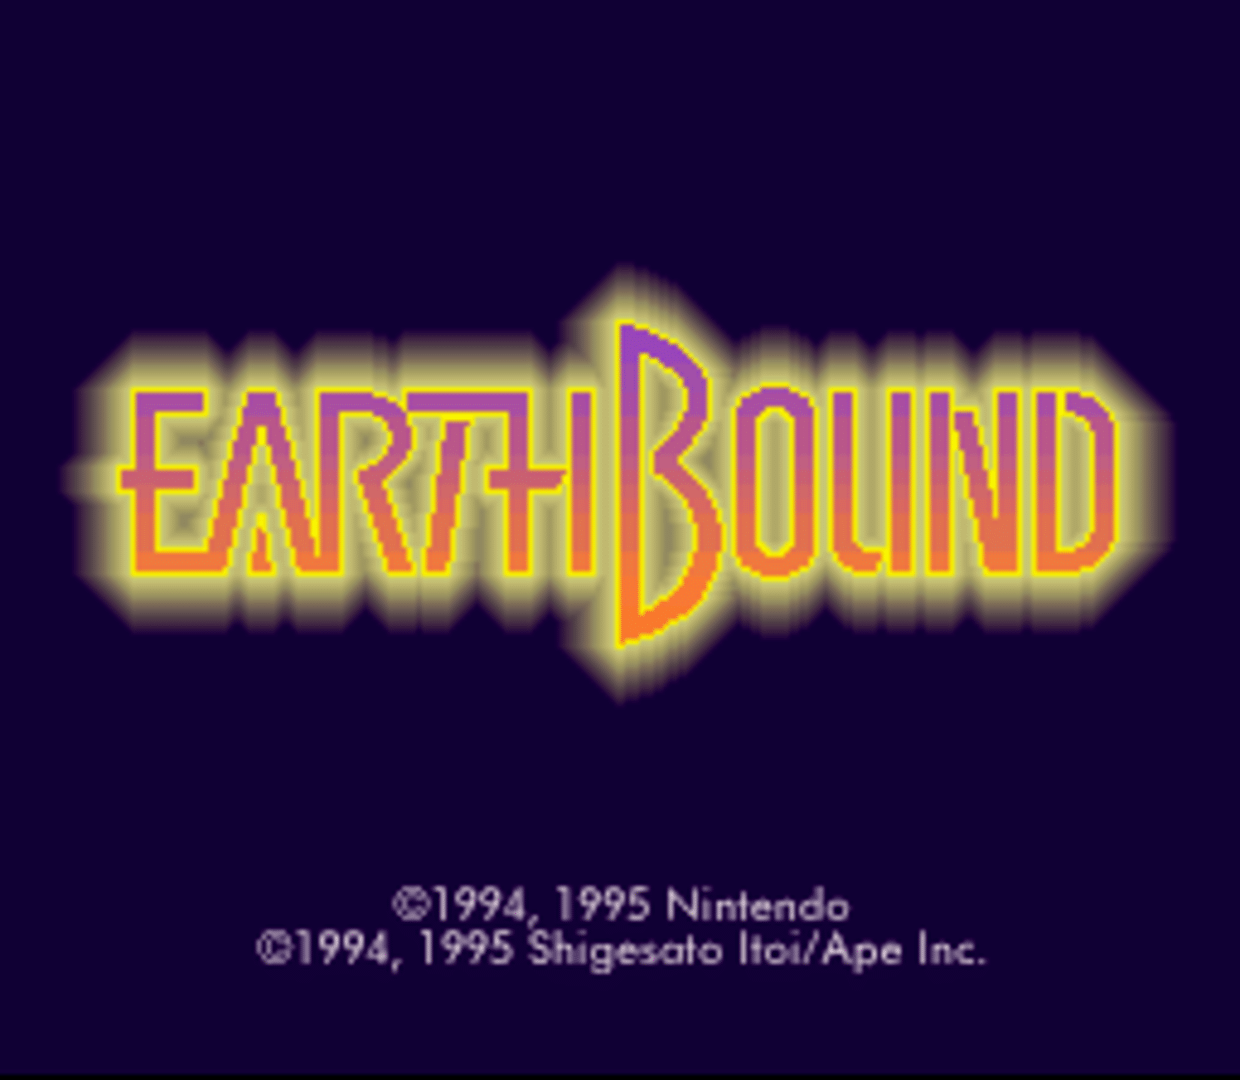 download earthbounds